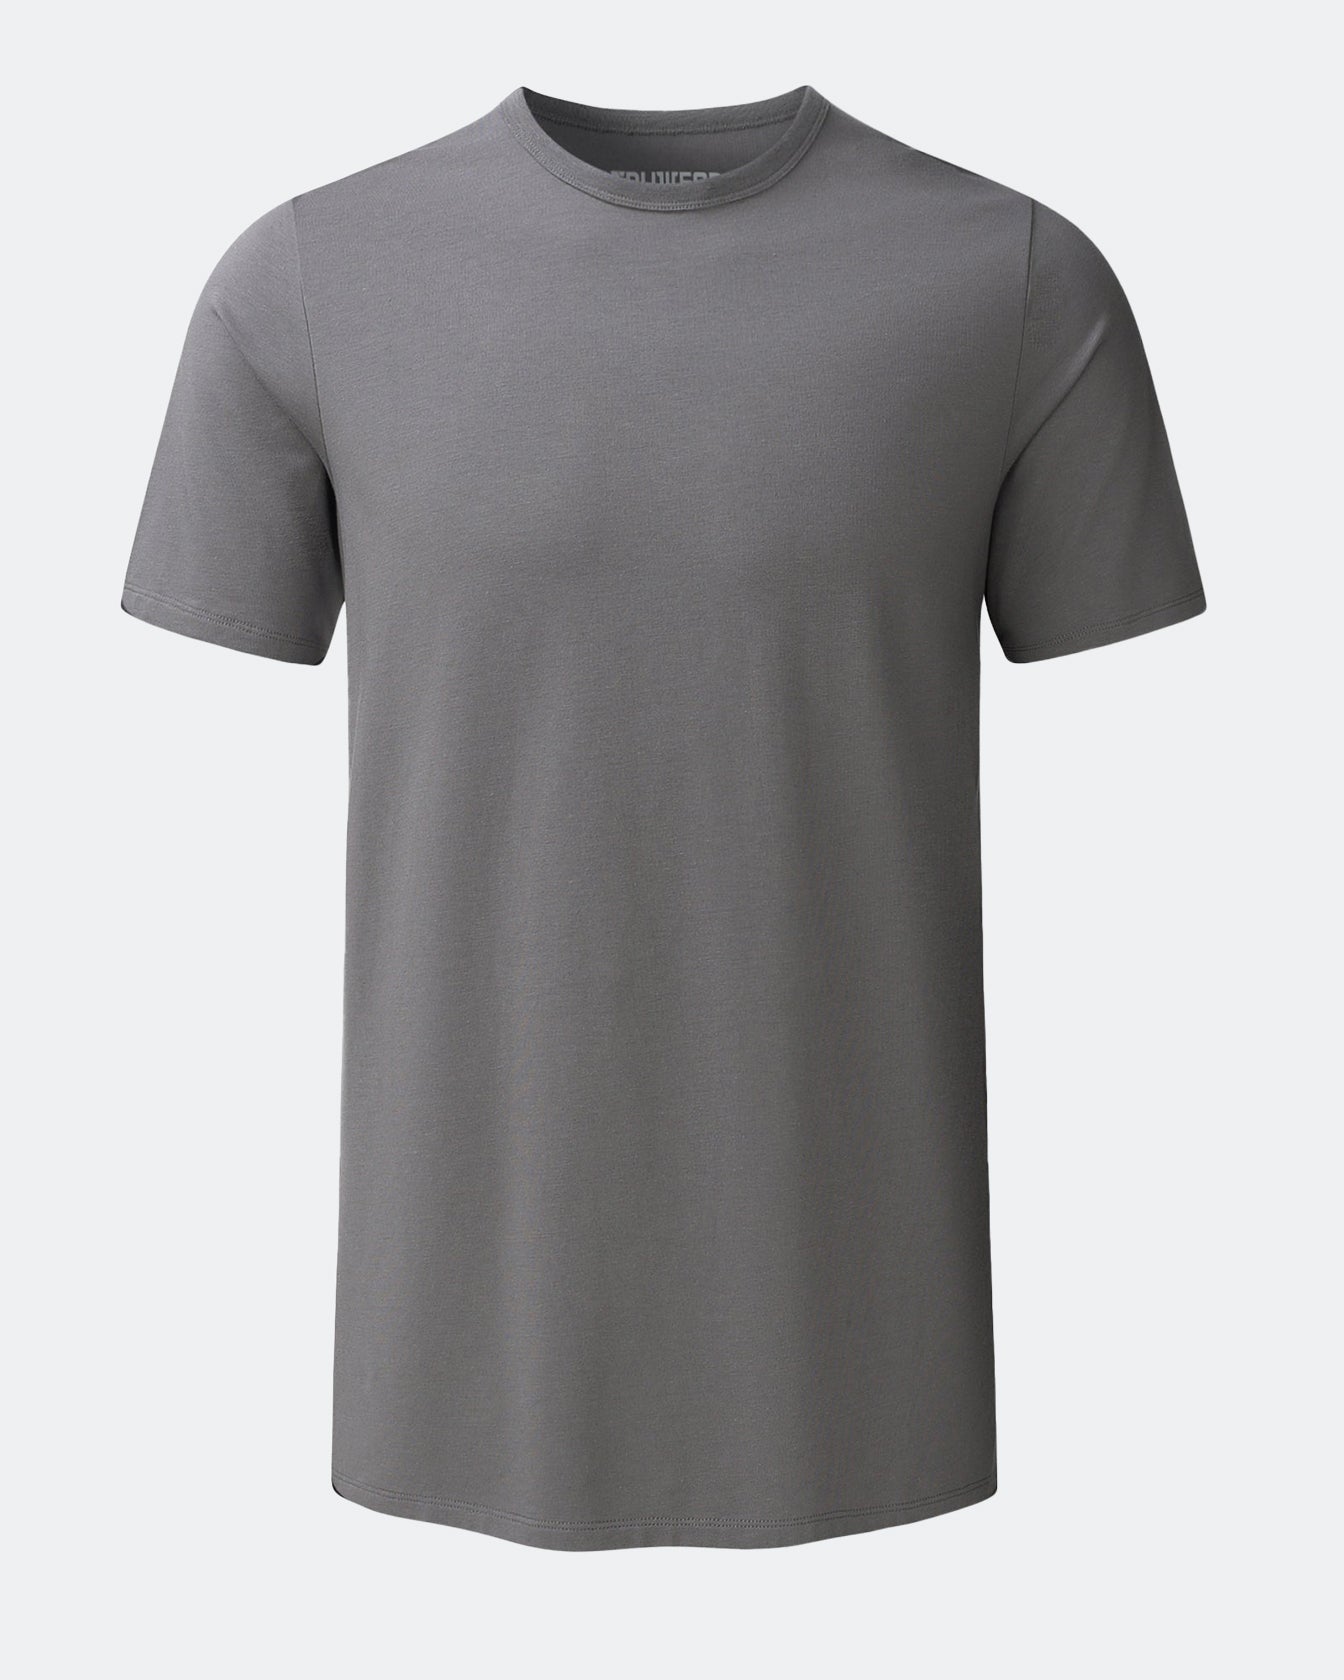 Spectacle 2.0 Charcoal T-Shirt